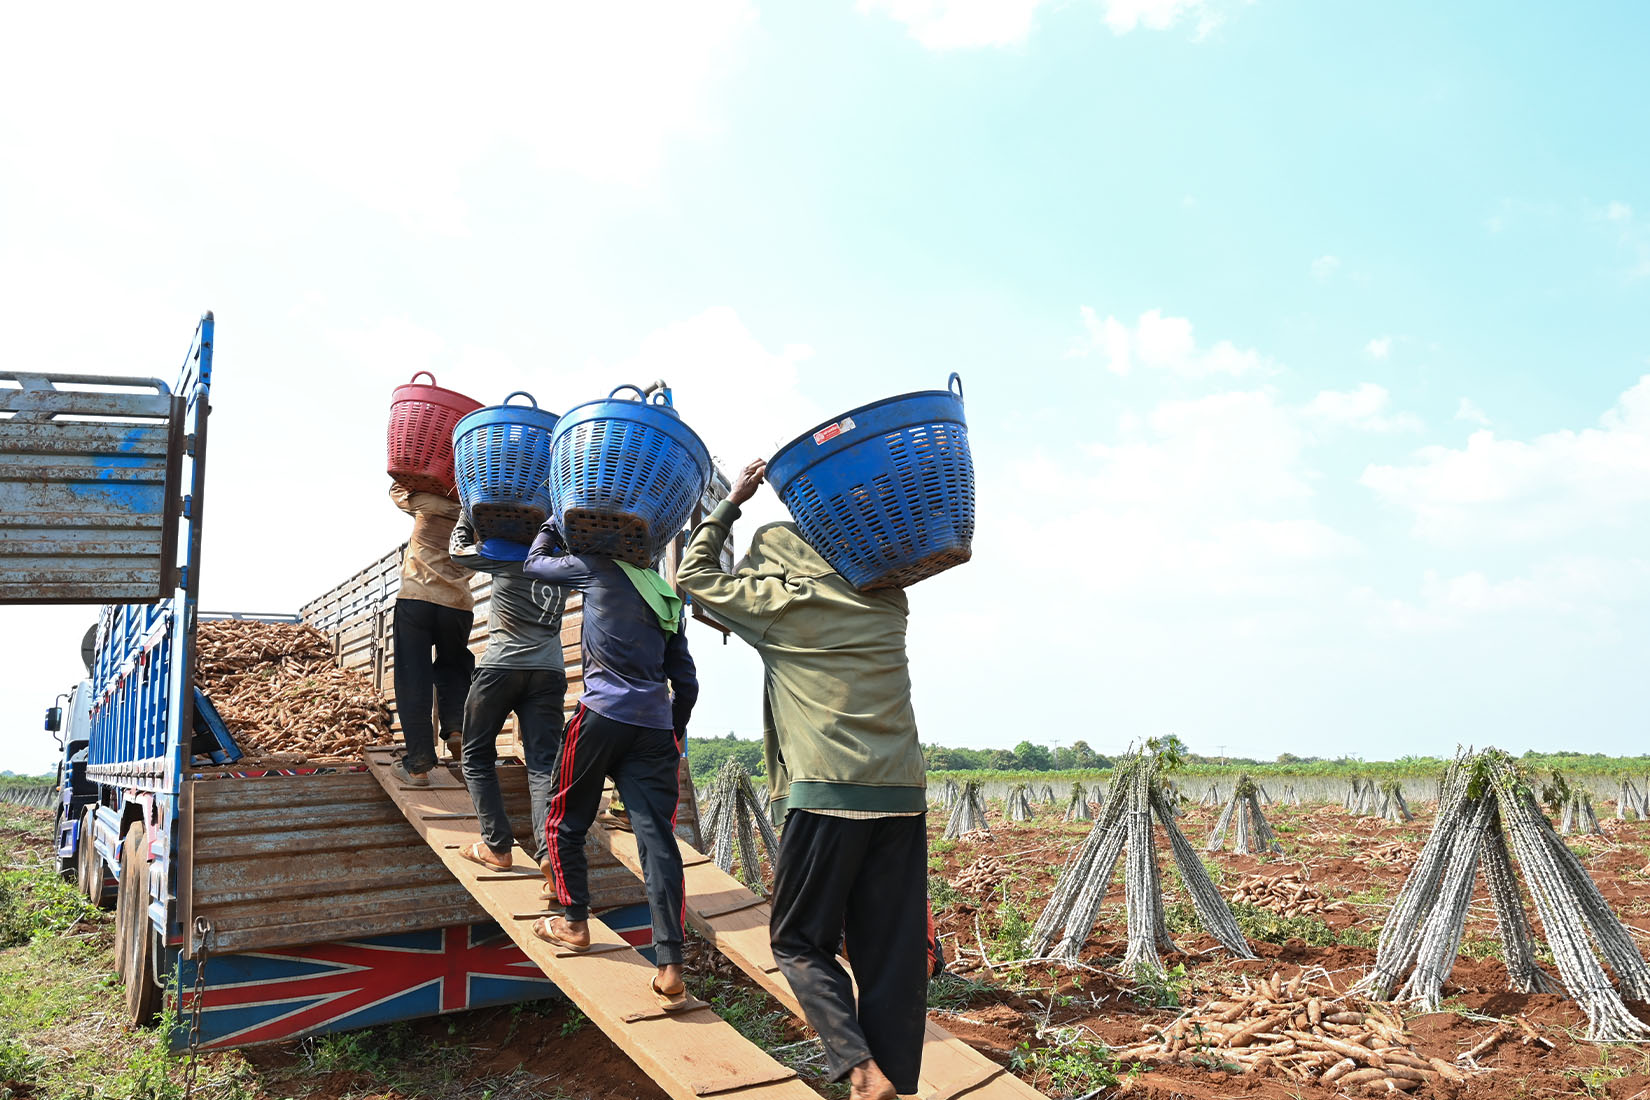 Four men carrying large plastic baskets walking up a ramp into a truck filled with cassava.